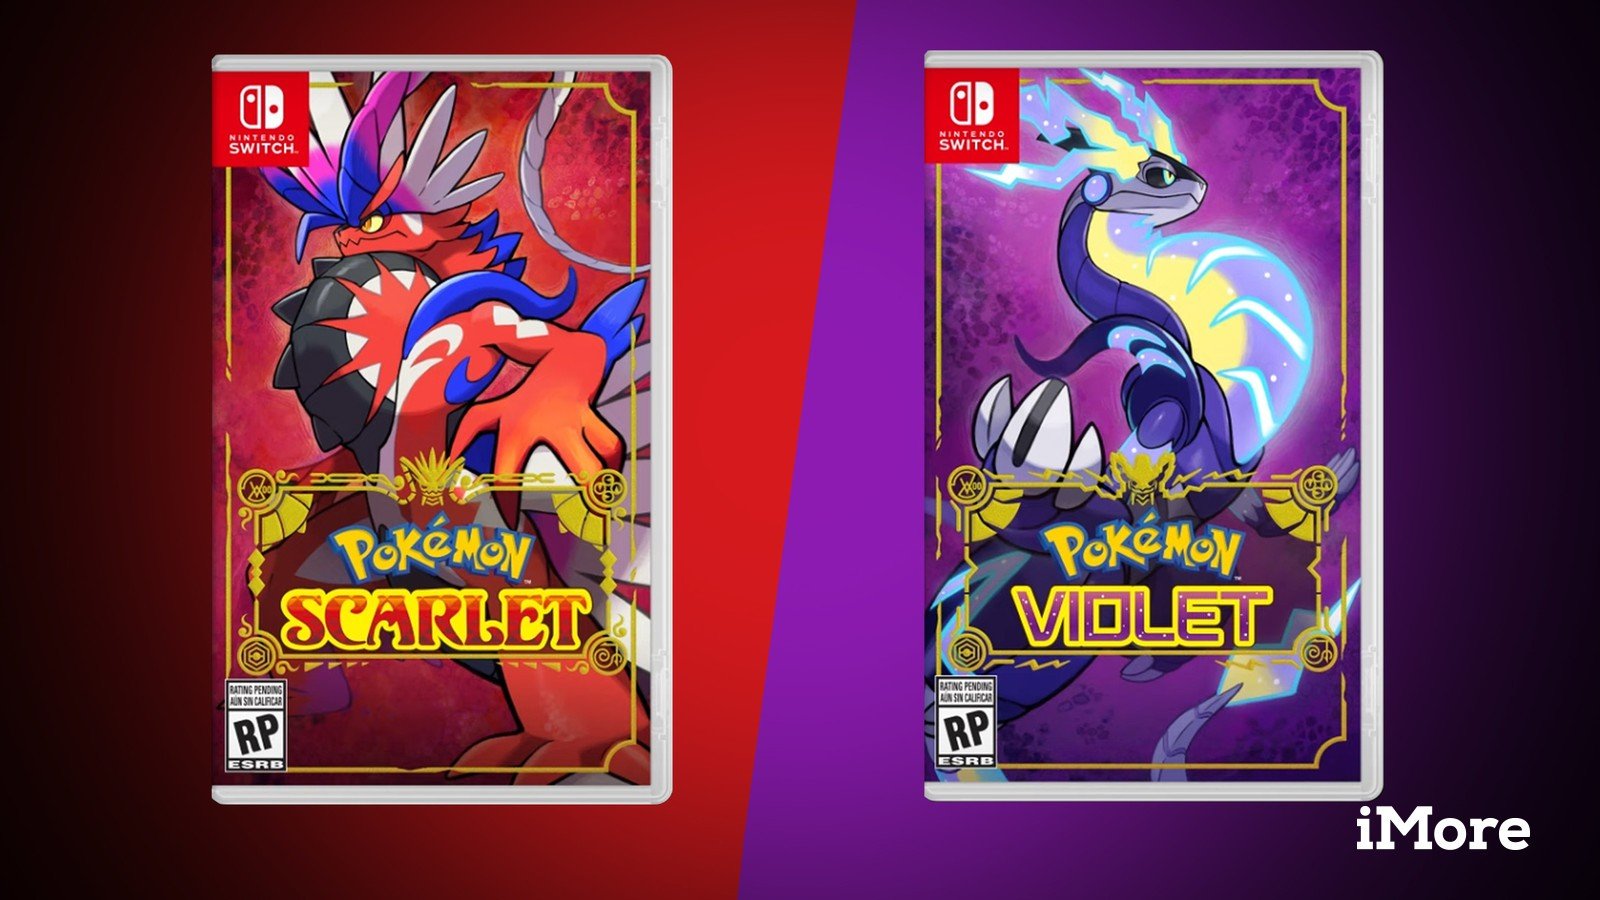 How to preorder Pokémon Scarlet and Violet